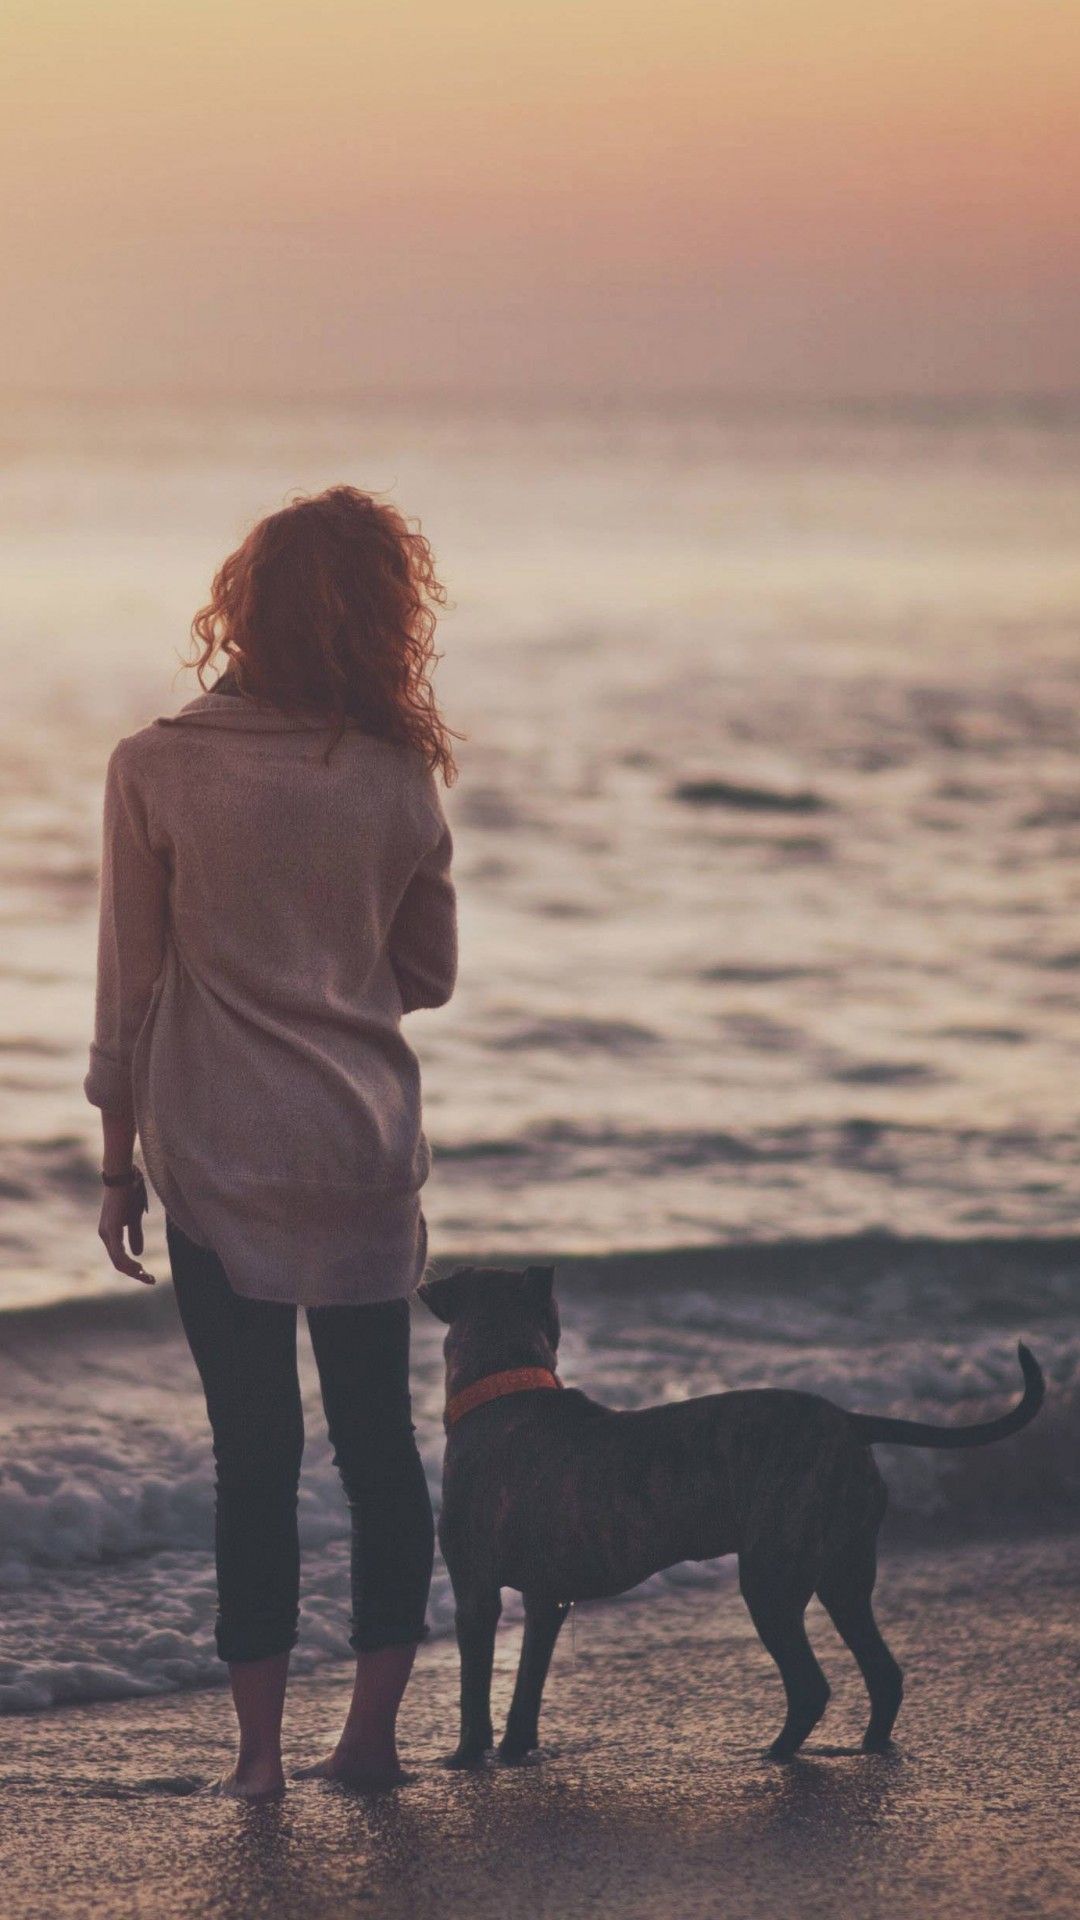 Girl And Dog Seaside IPhone 6 6 Plus And IPhone 5 4 Wallpaper